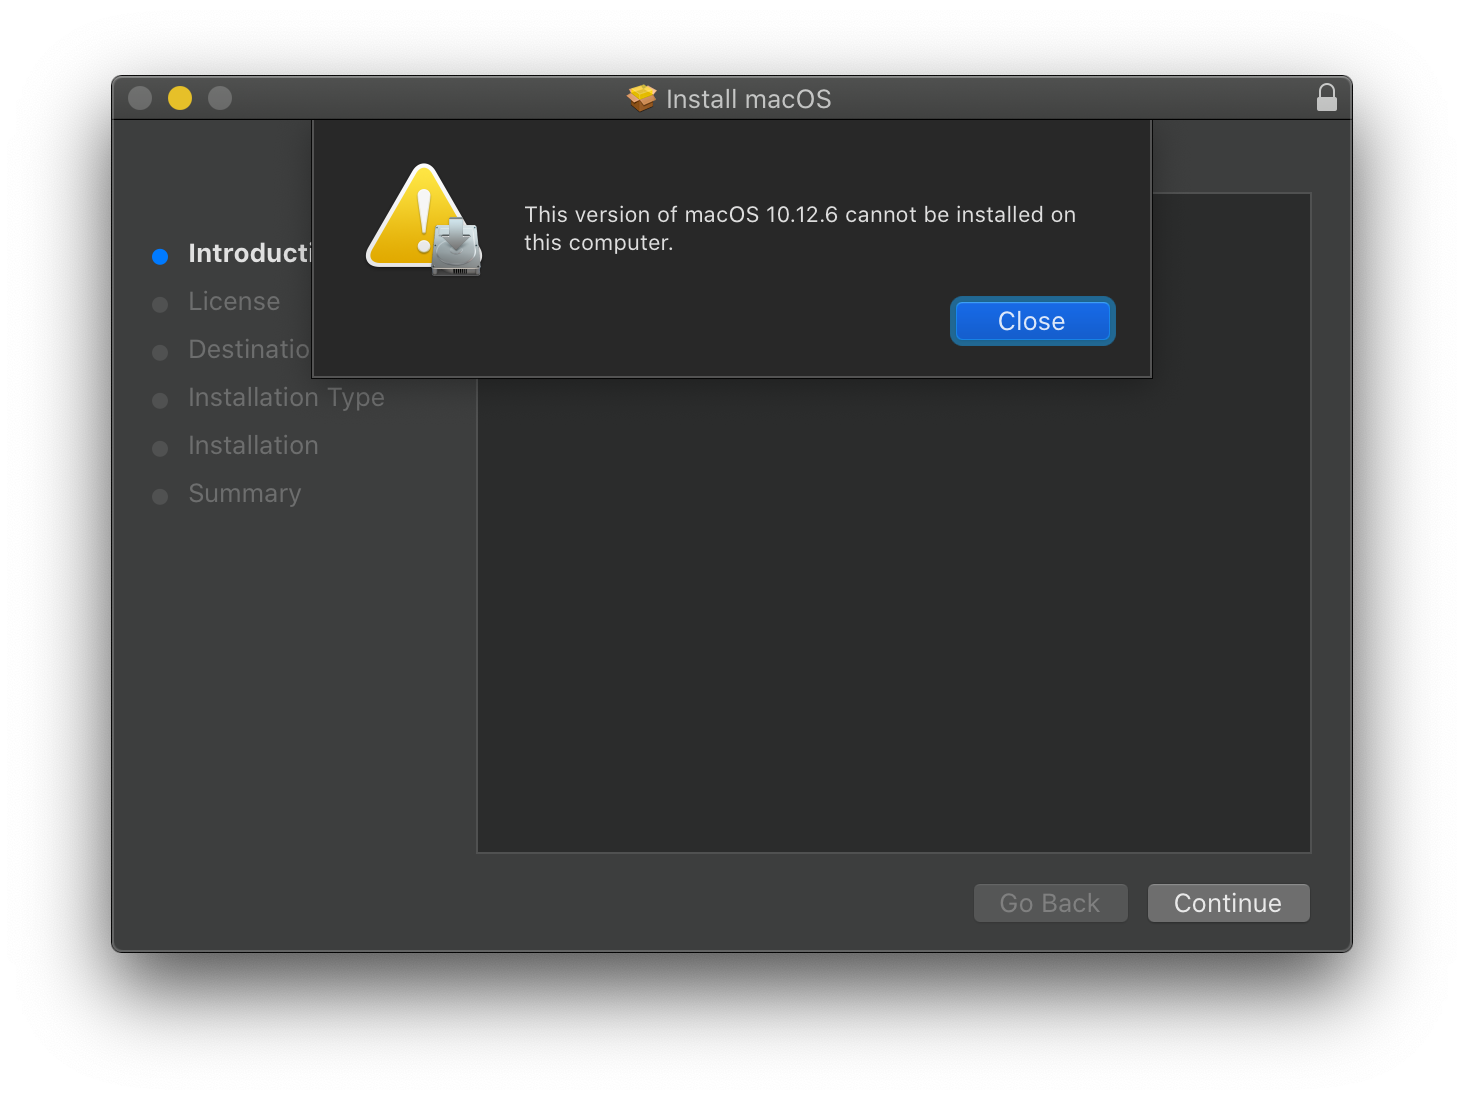 Error dialog: This version of macOS 10.12 cannot be installed on this computer.